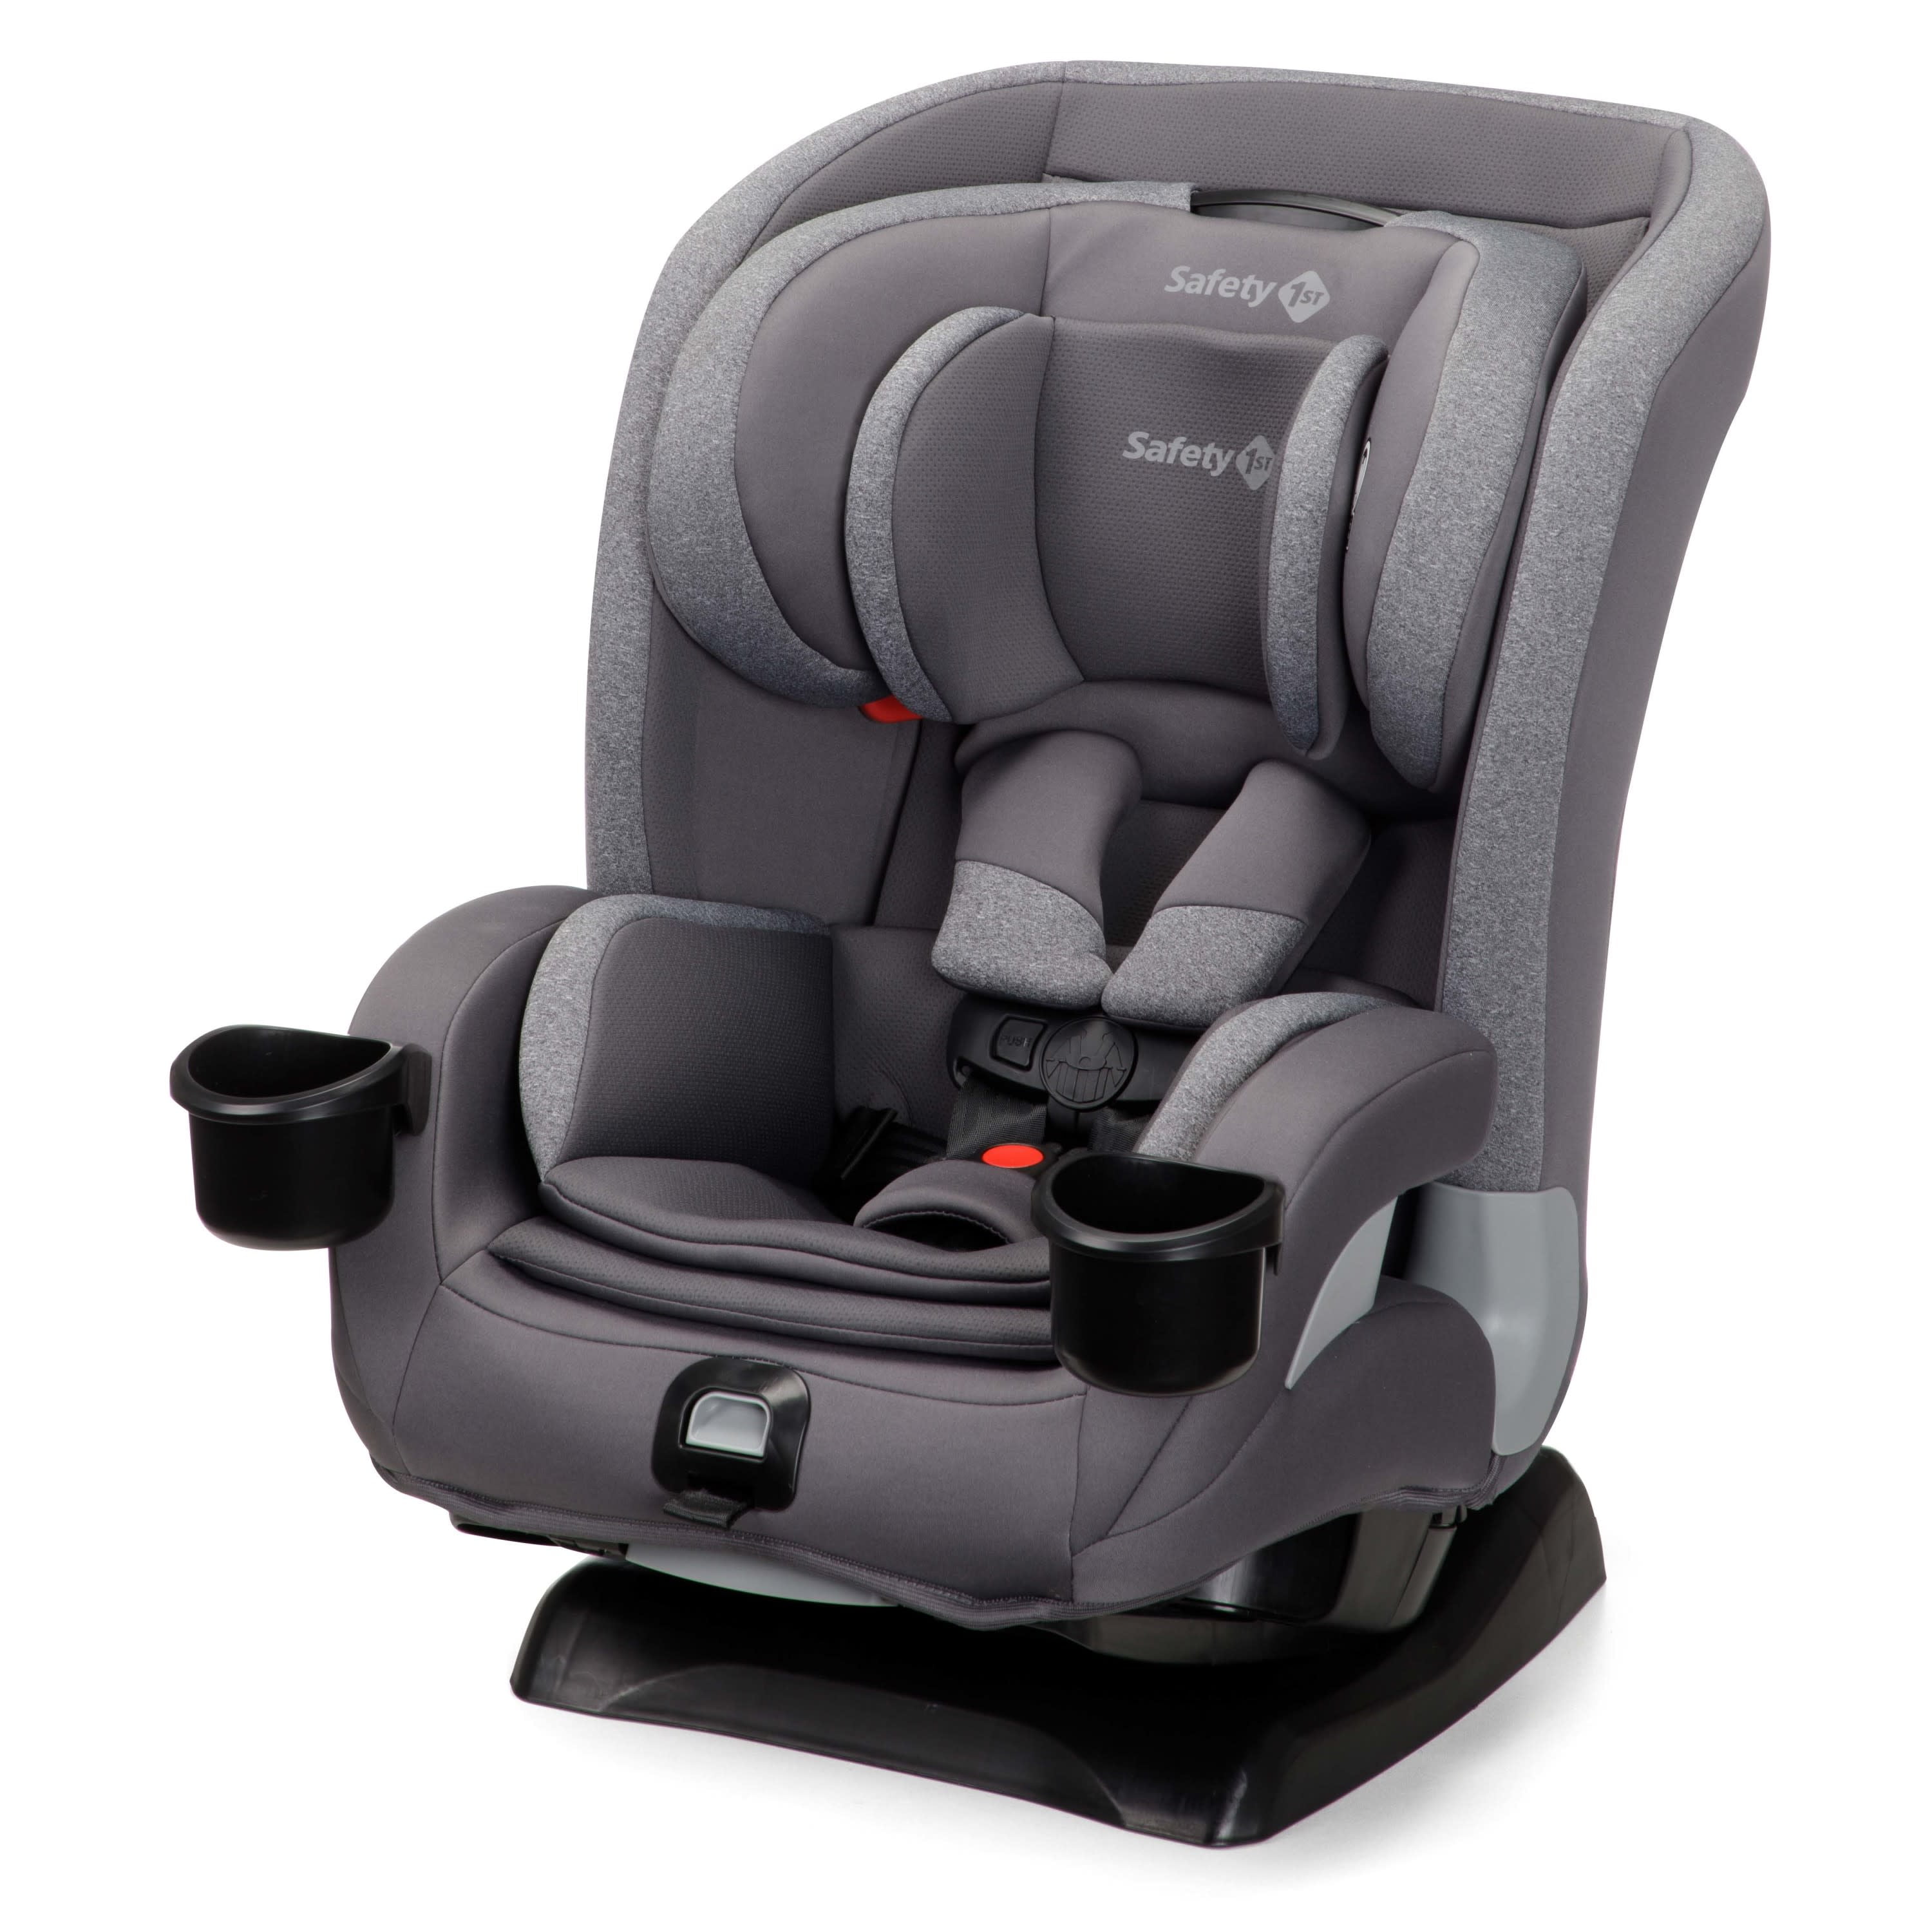 Safety 1ˢᵗ SlimRide All-in-One Convertible Car Seat, Grey All Day